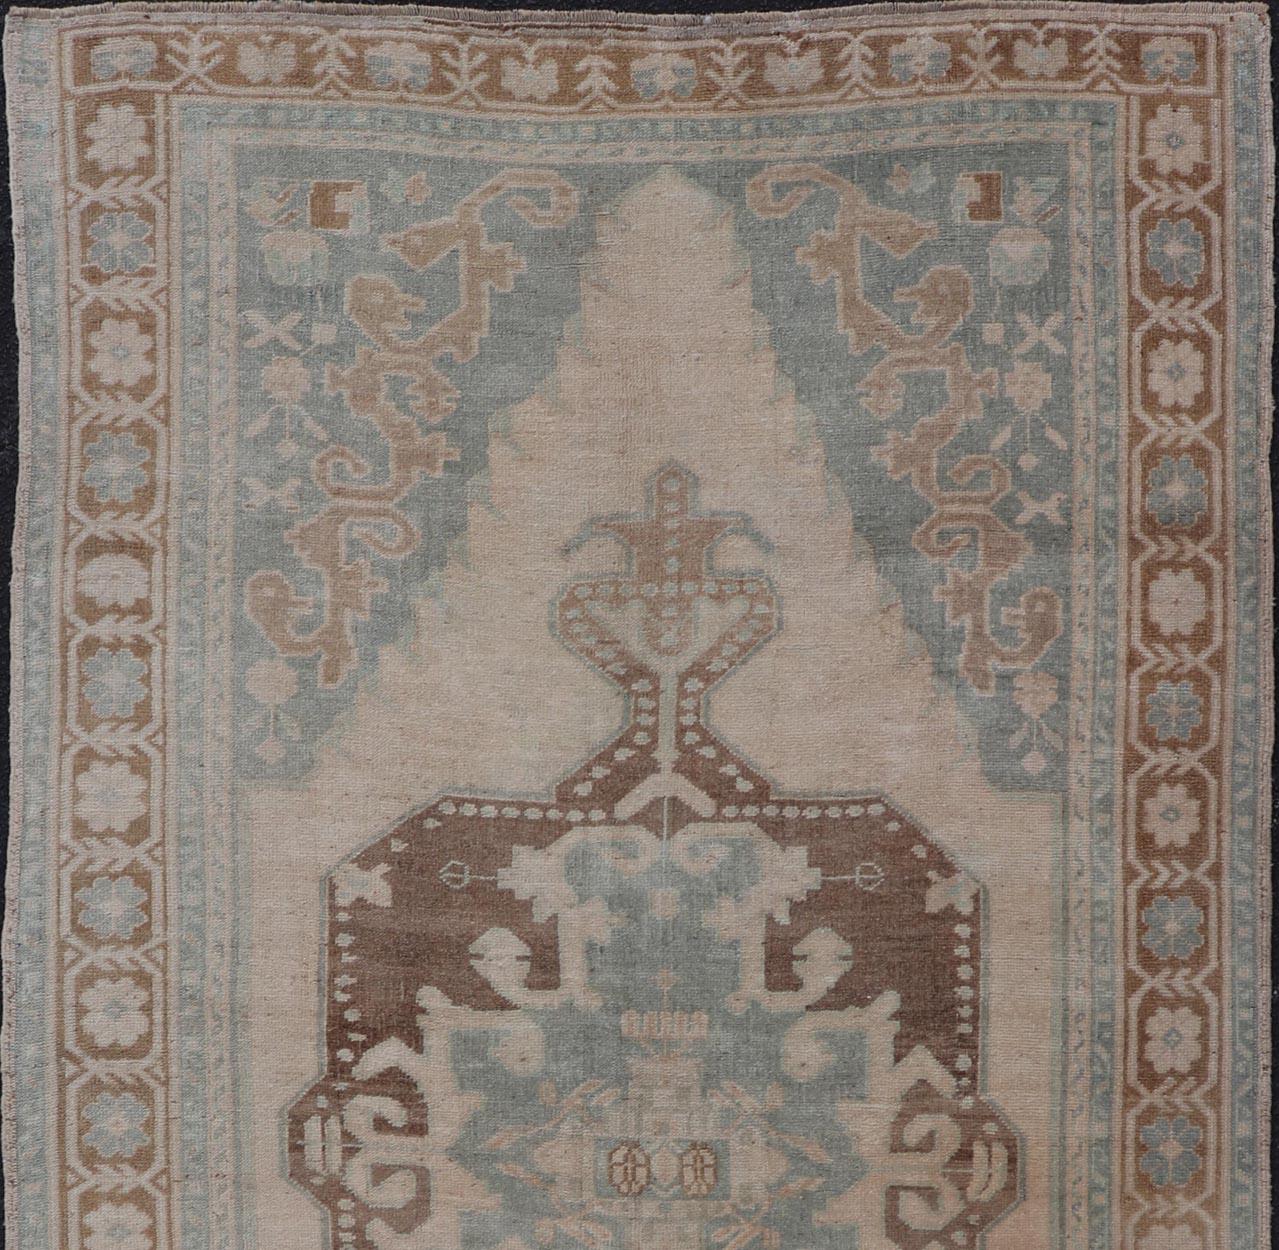 MidCentury Turkish Oushak Rug in Wool with Sub-Geometric Etched Medallion Design In Good Condition For Sale In Atlanta, GA